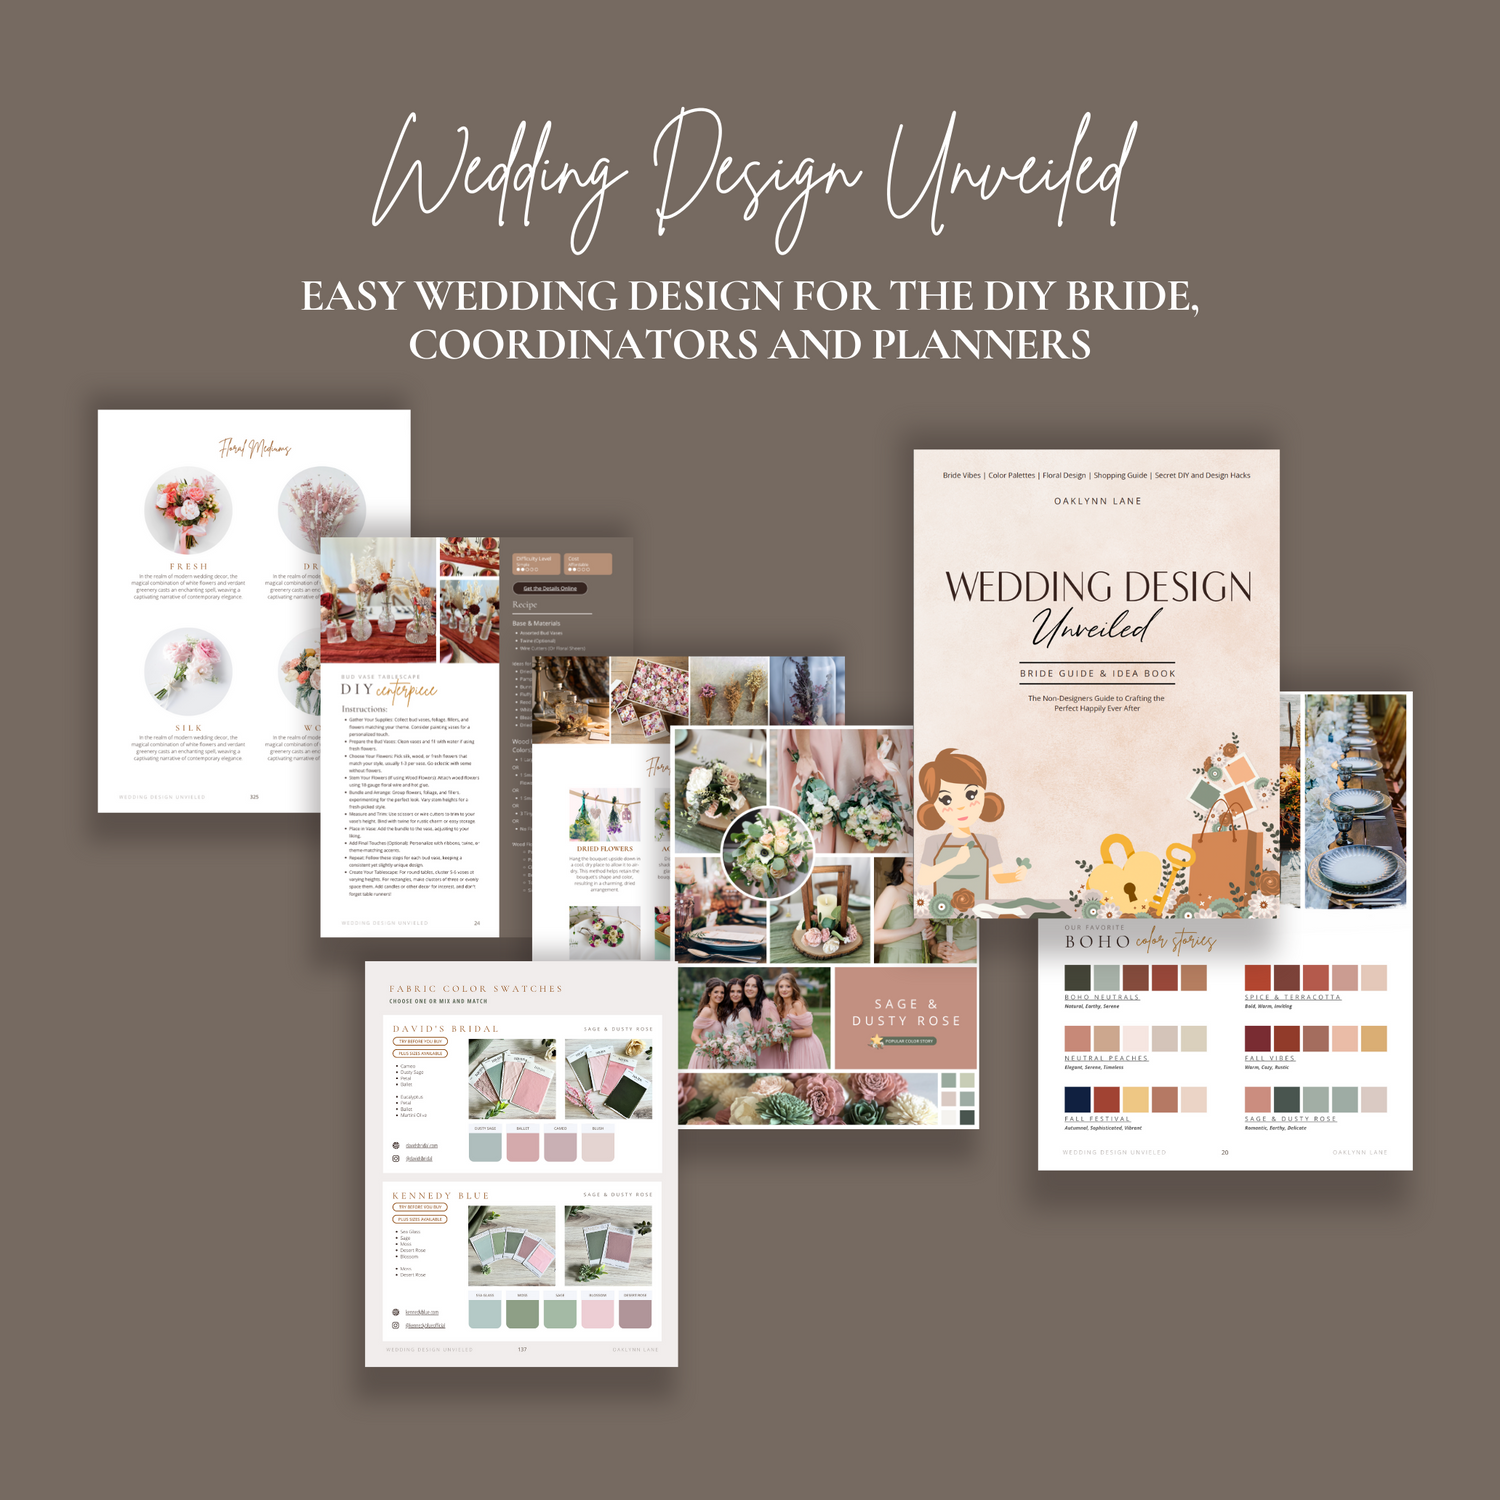 Wedding Design Unveiled image of book snippets including color palettes, swatches, DIY centerpiece instructions and floral mediums